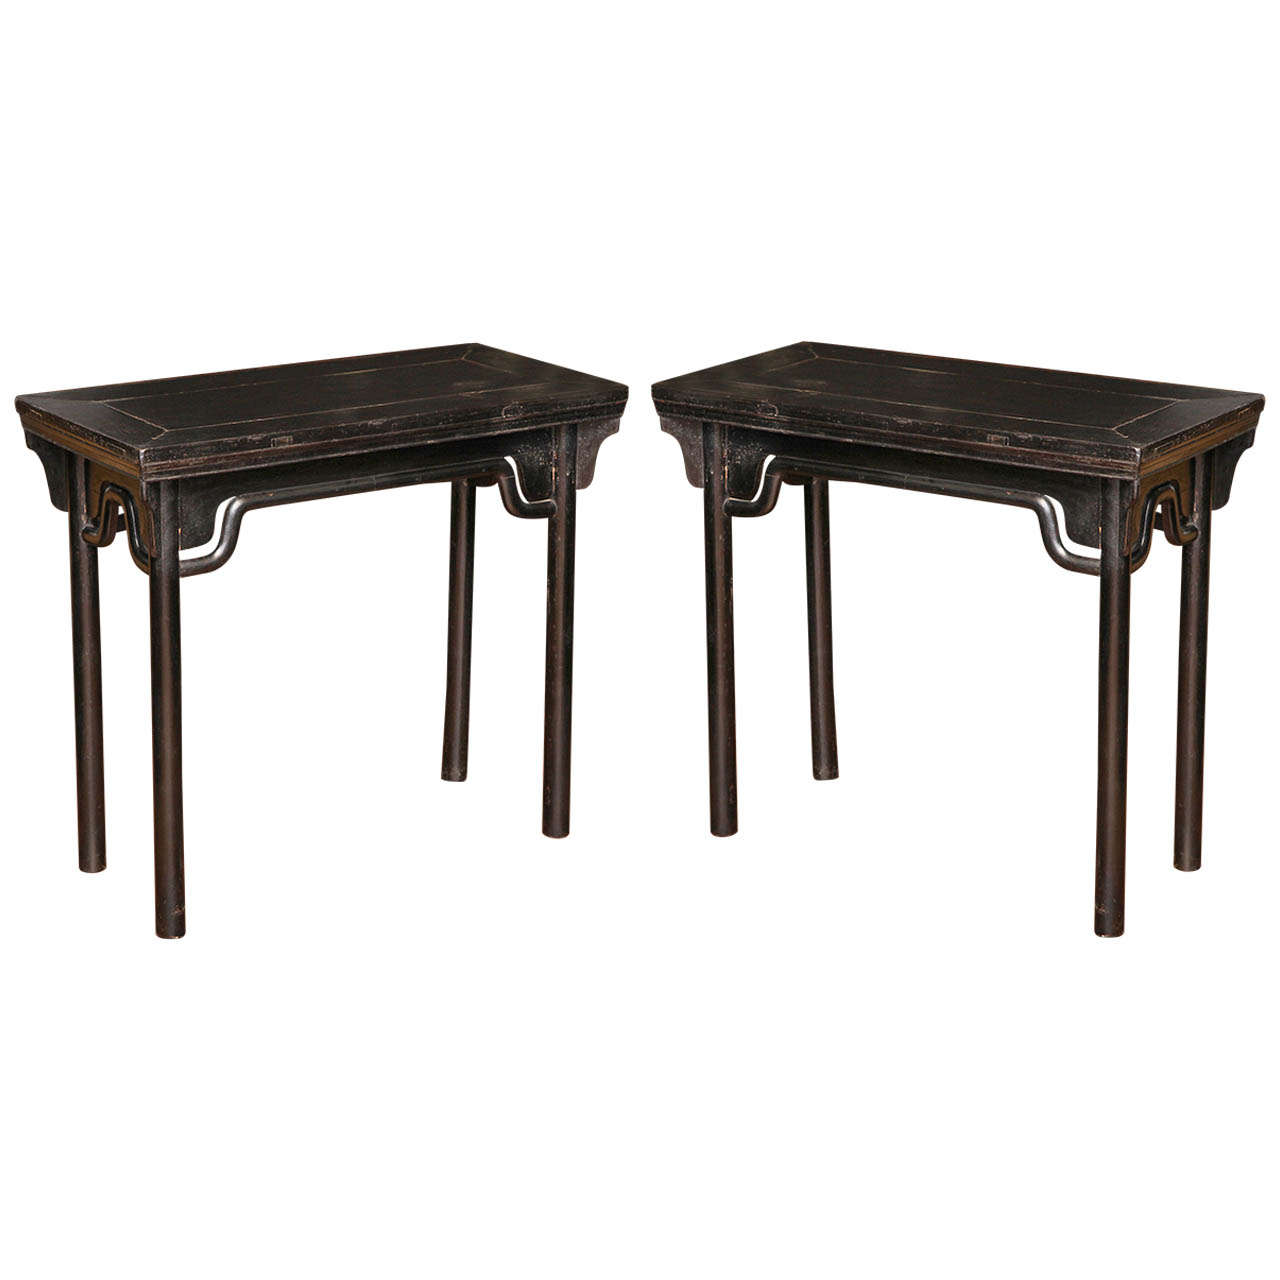 Qing Dynasty Small Brown Lacquered Elmwood Console from China, 19th Century